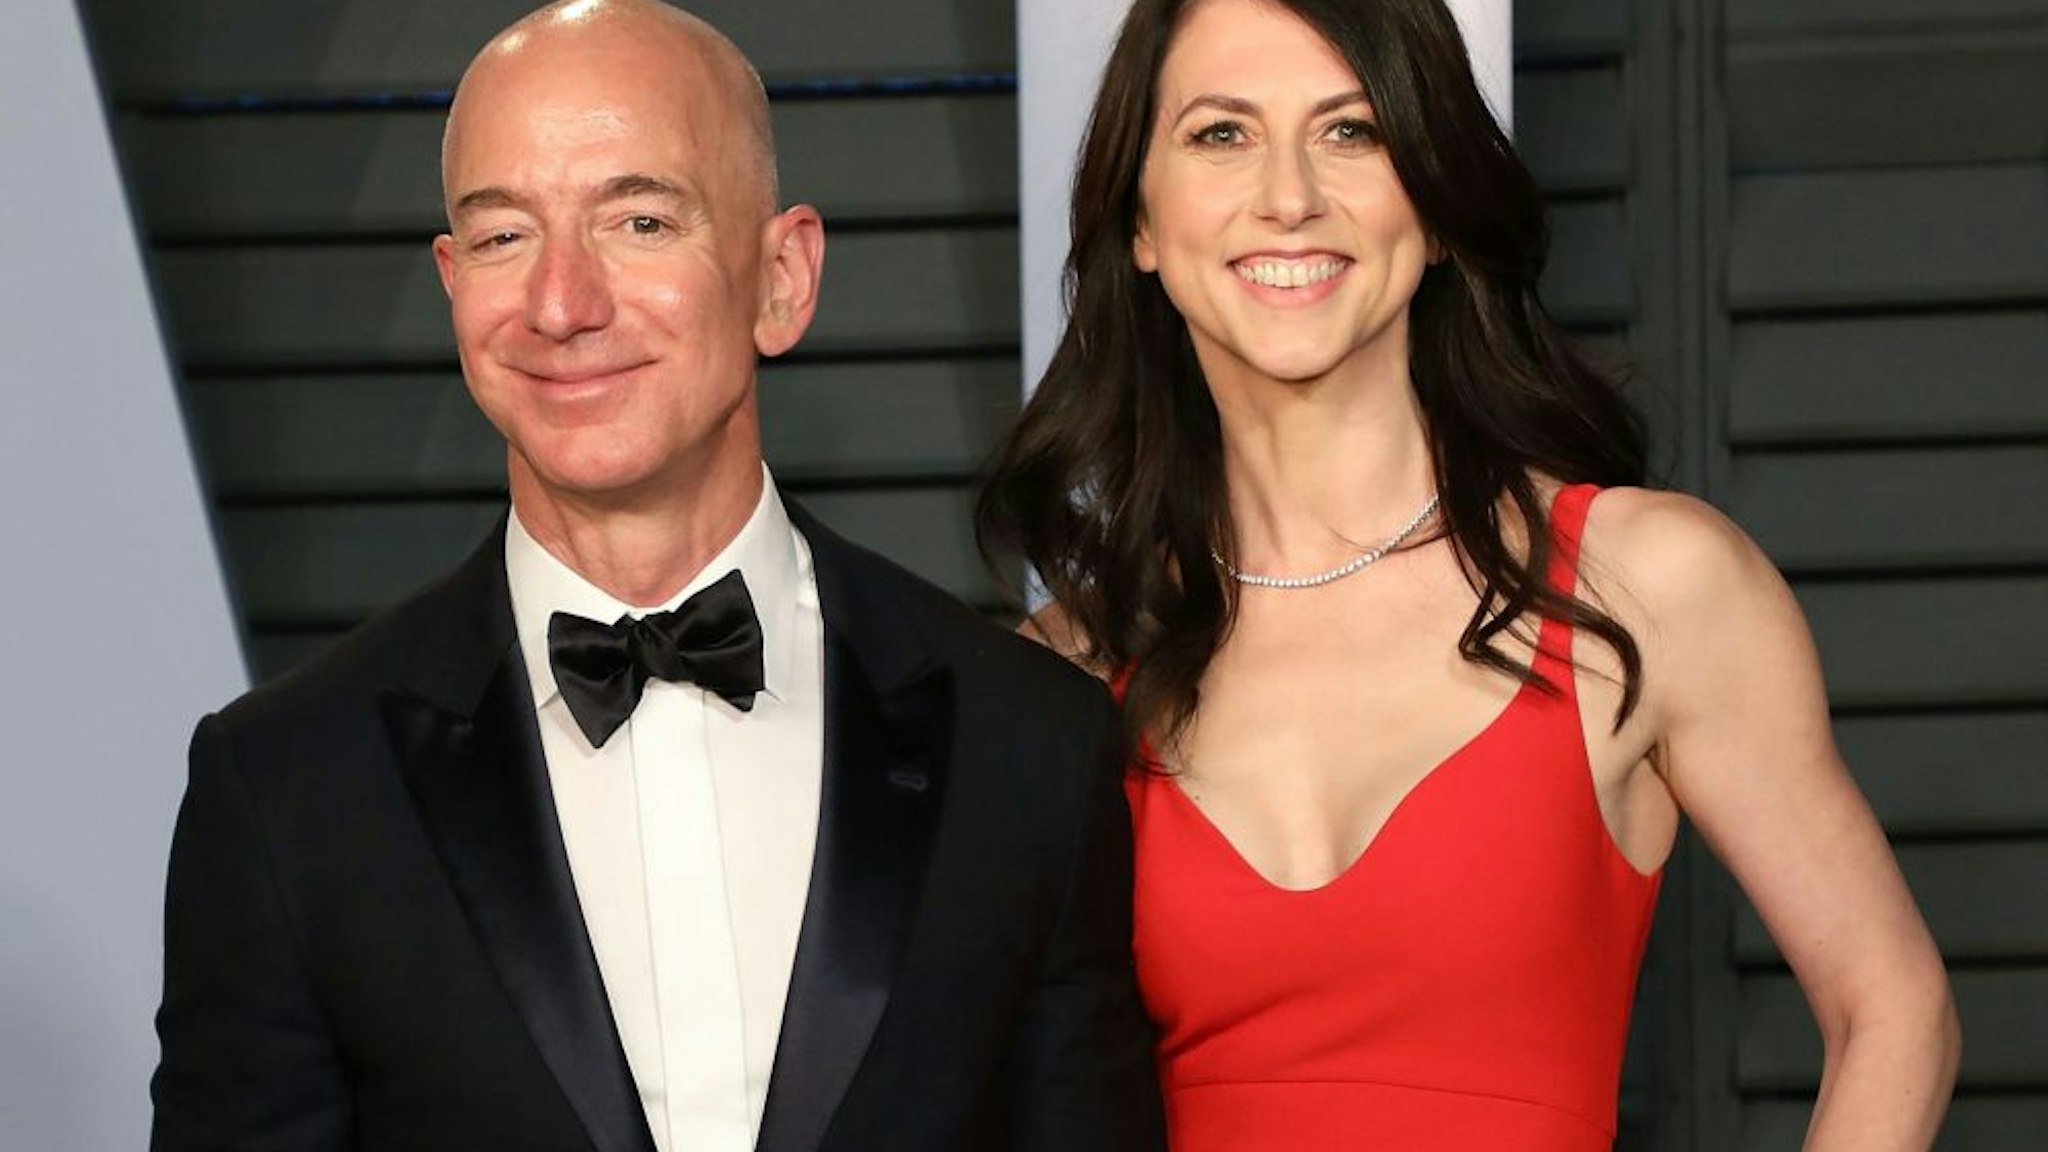 BEVERLY HILLS, CA - MARCH 04: Amazon CEO Jeff Bezos (L) and MacKenzie Bezos attend the 2018 Vanity Fair Oscar Party hosted by Radhika Jones at Wallis Annenberg Center for the Performing Arts on March 4, 2018 in Beverly Hills, California.